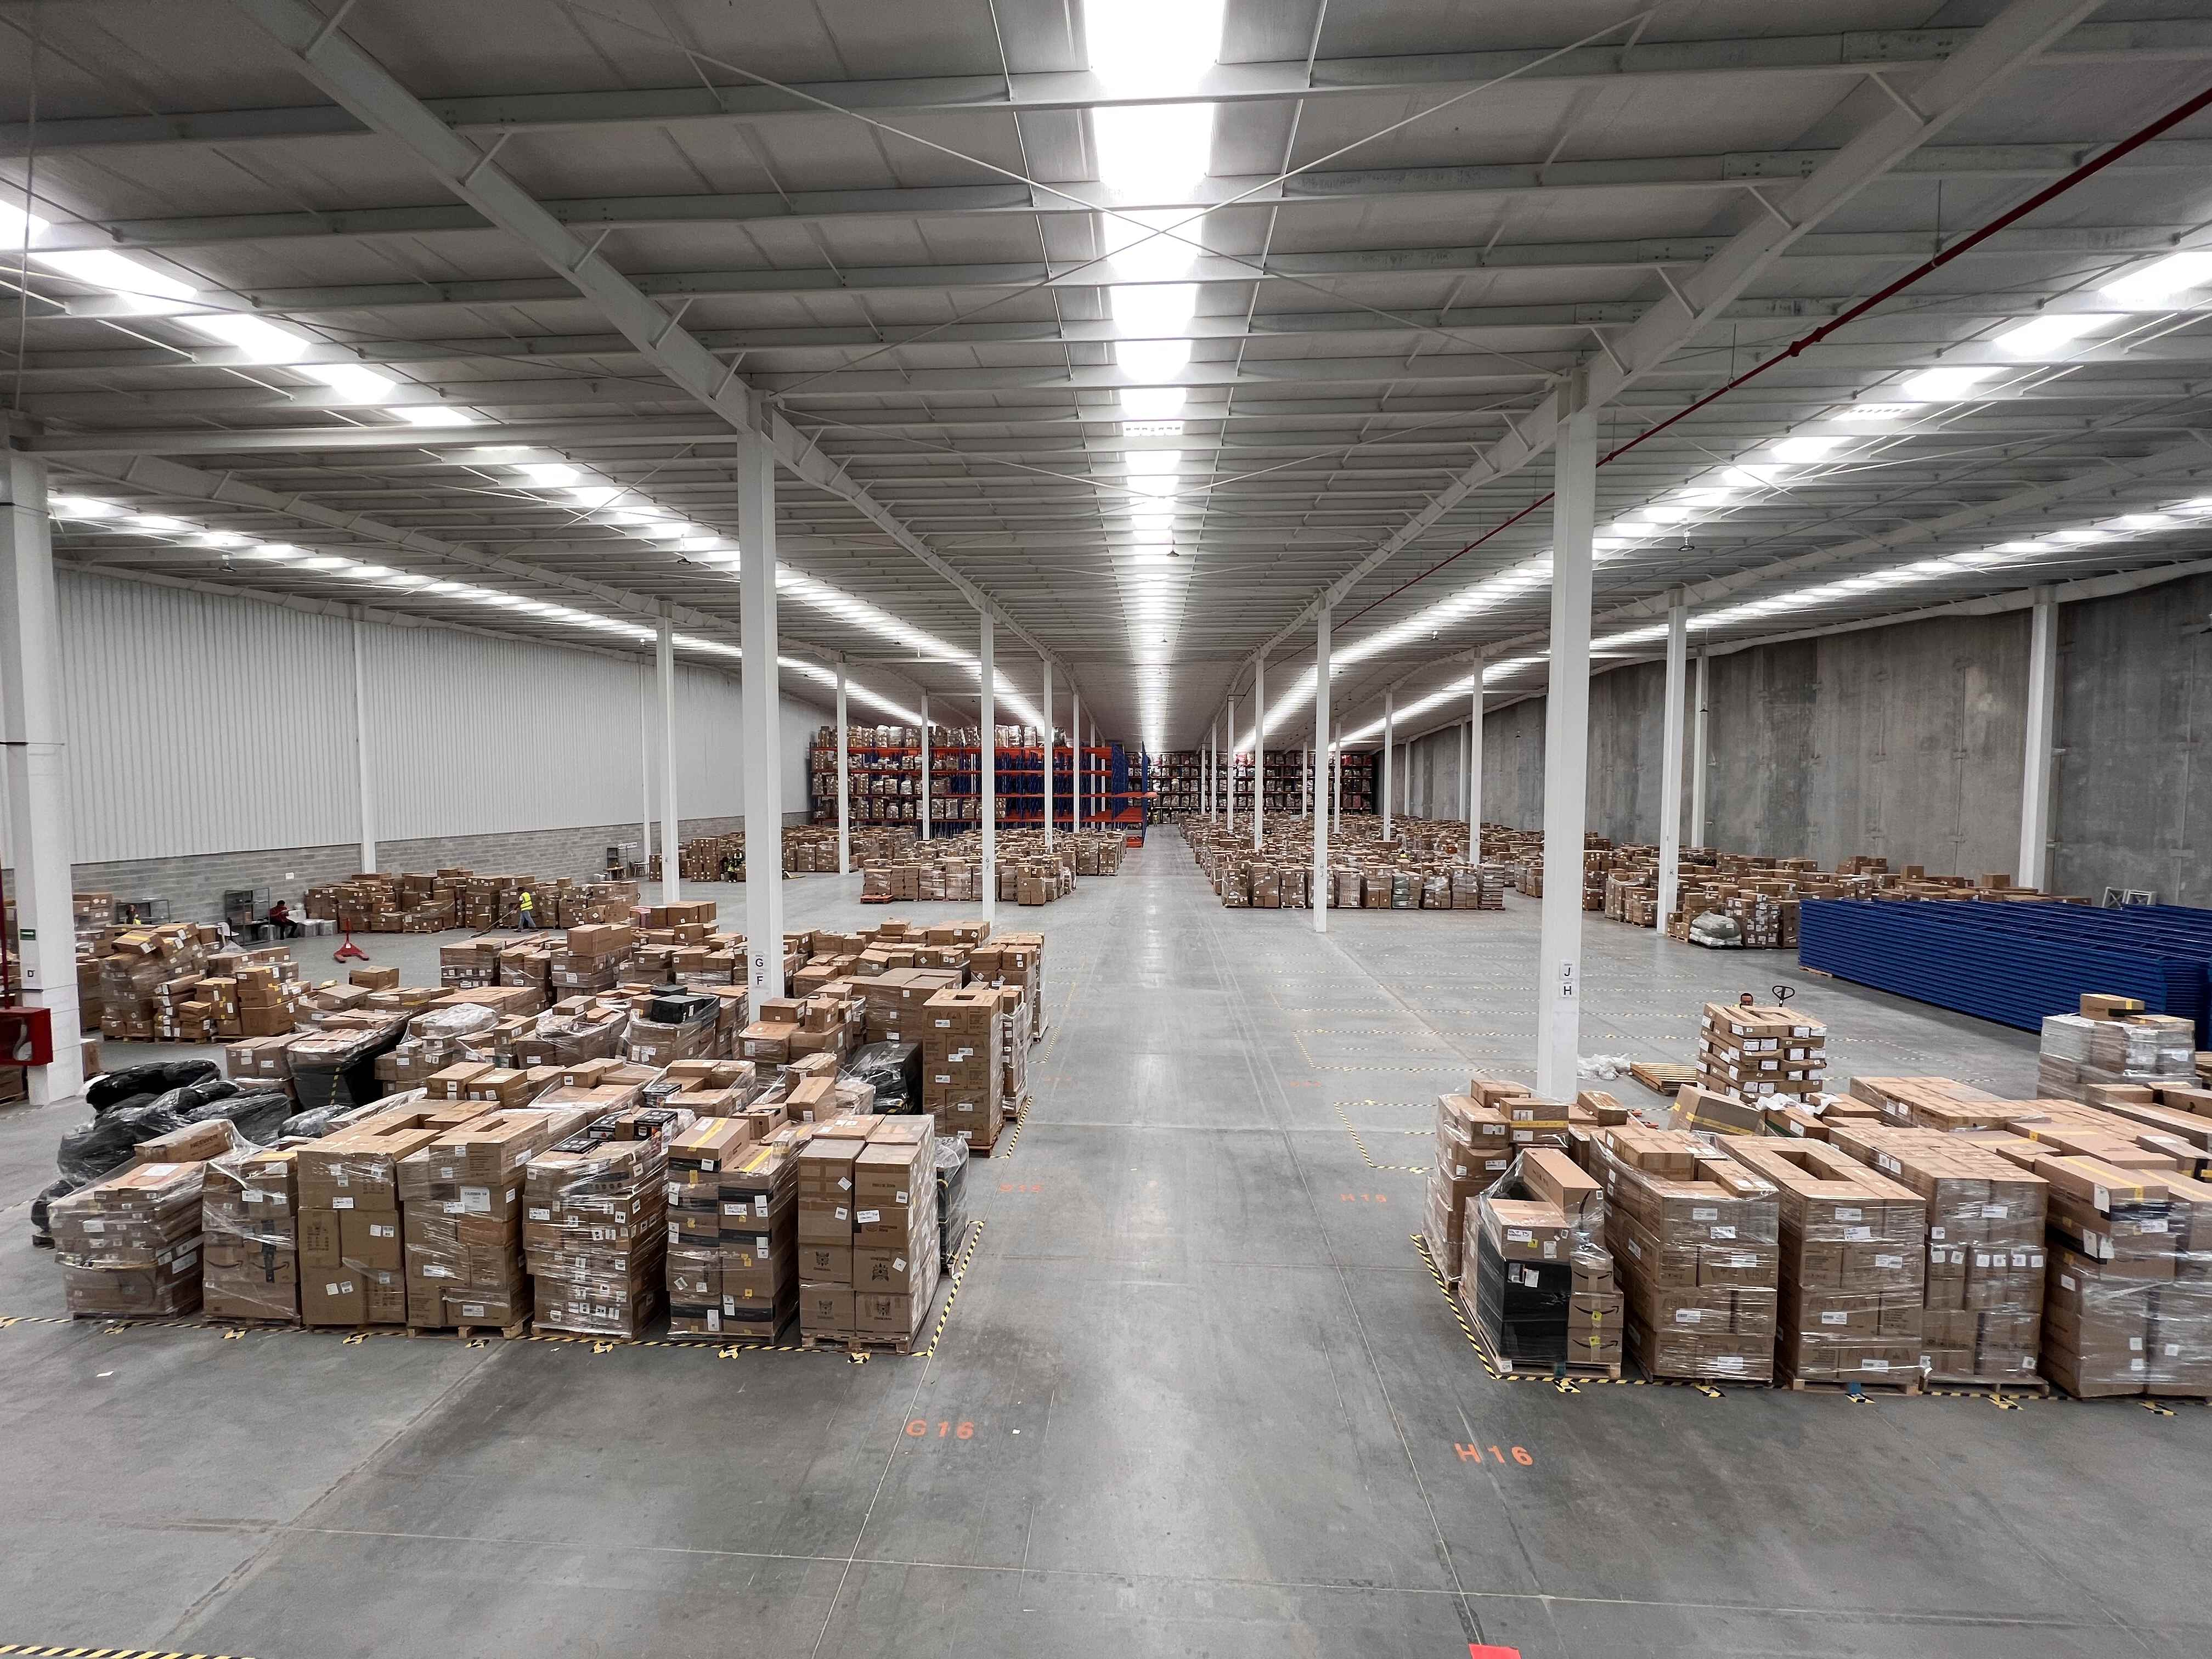 How to judge the quality of a Mexican overseas warehouse?